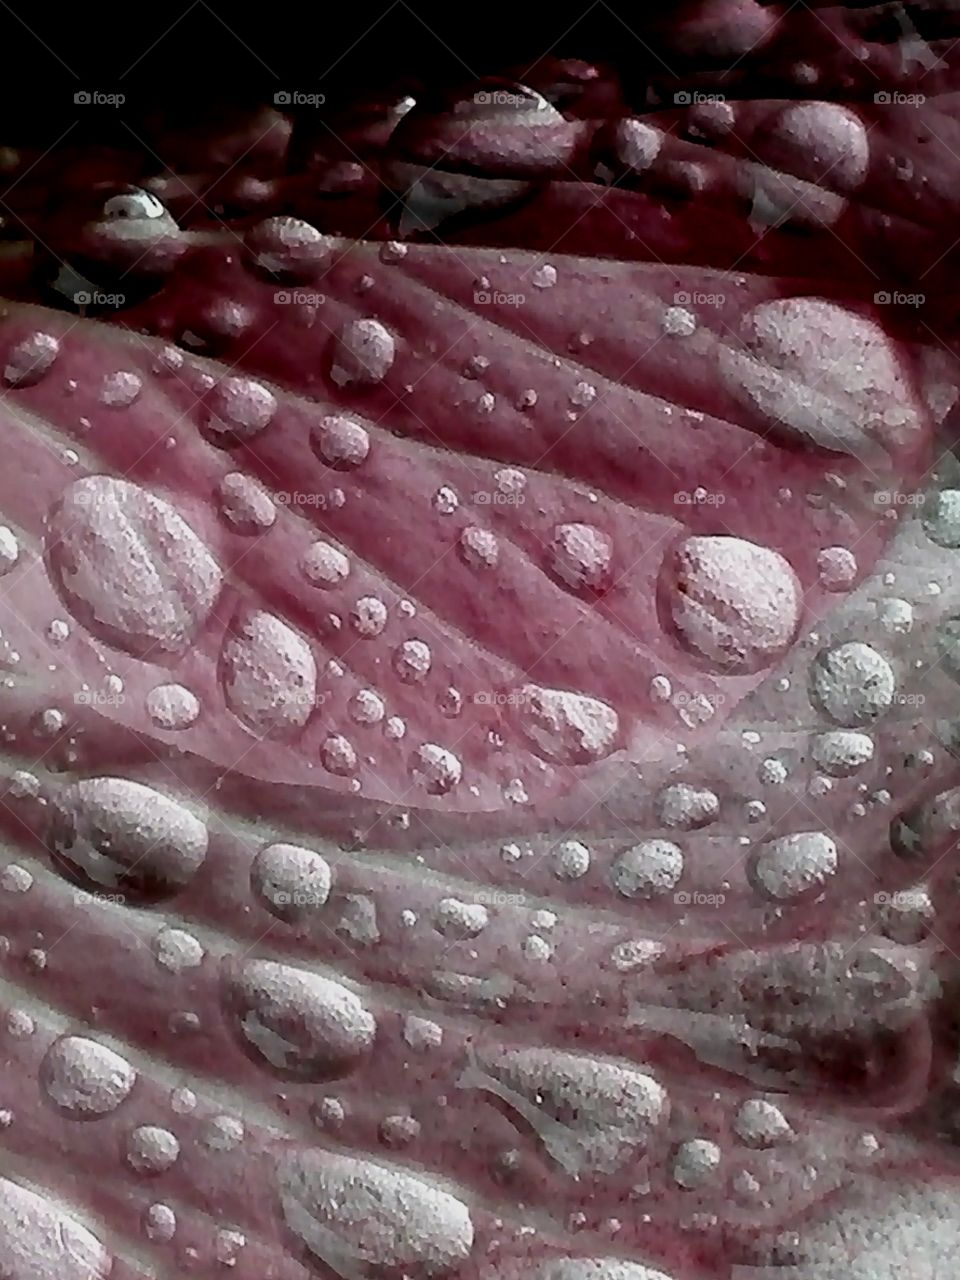 Waterdrops on cotton rose petals